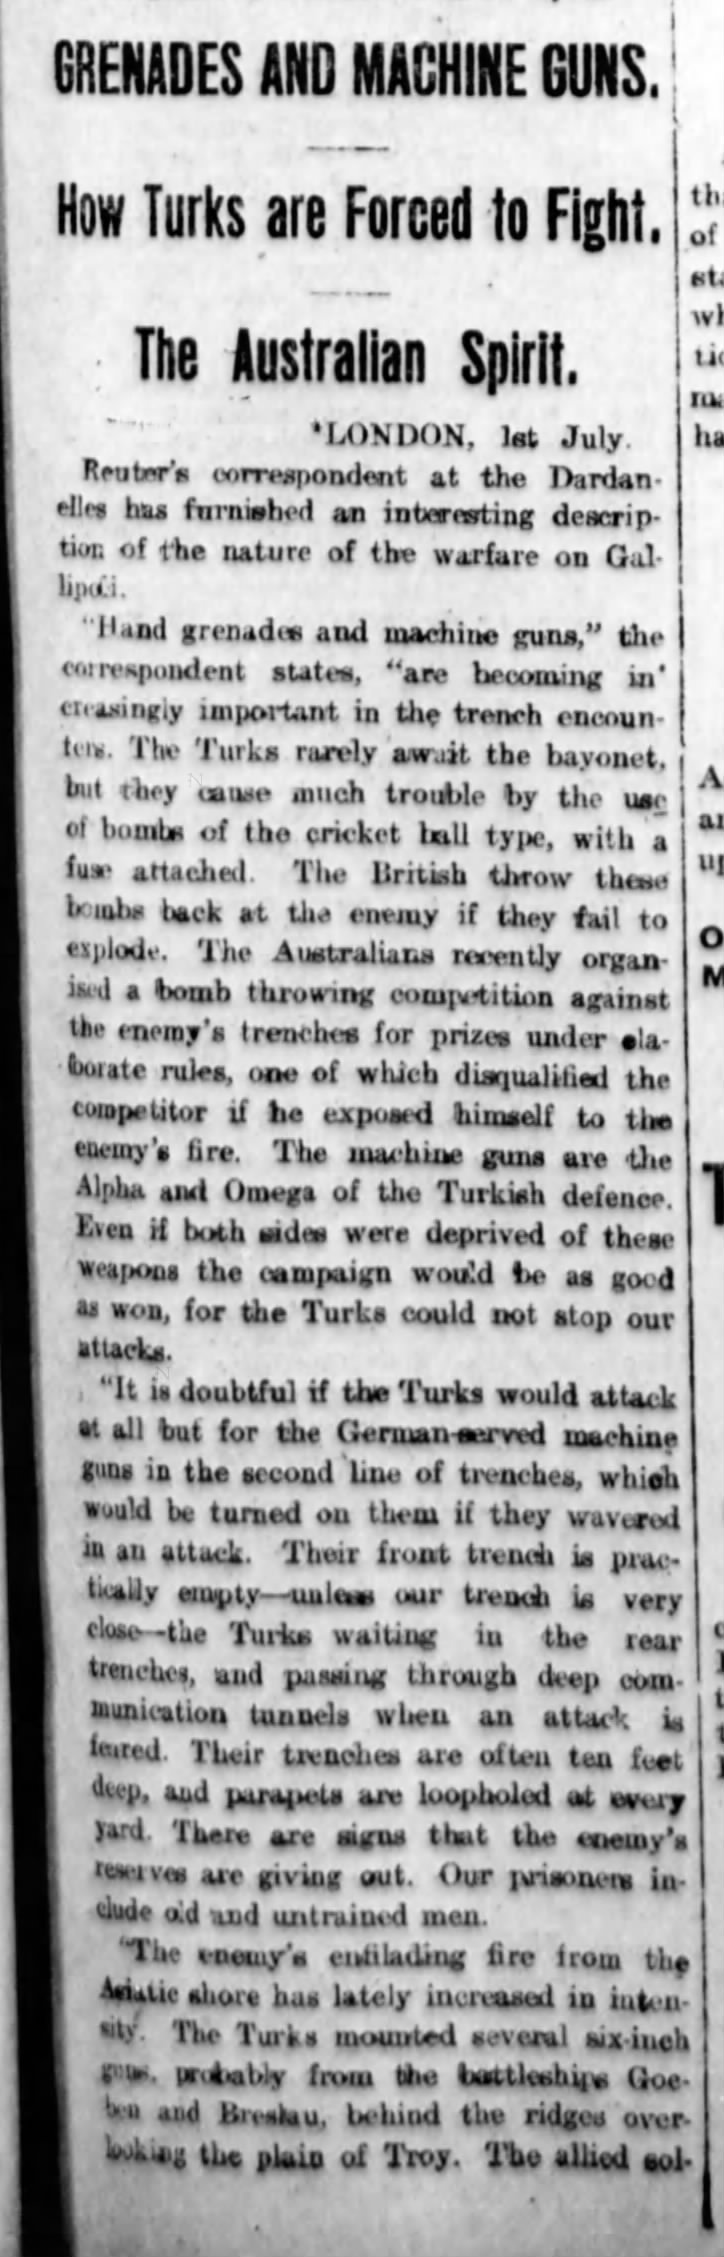 Excerpt from a newspaper description of "the nature of the warfare on Gallipoli" dated July 1915